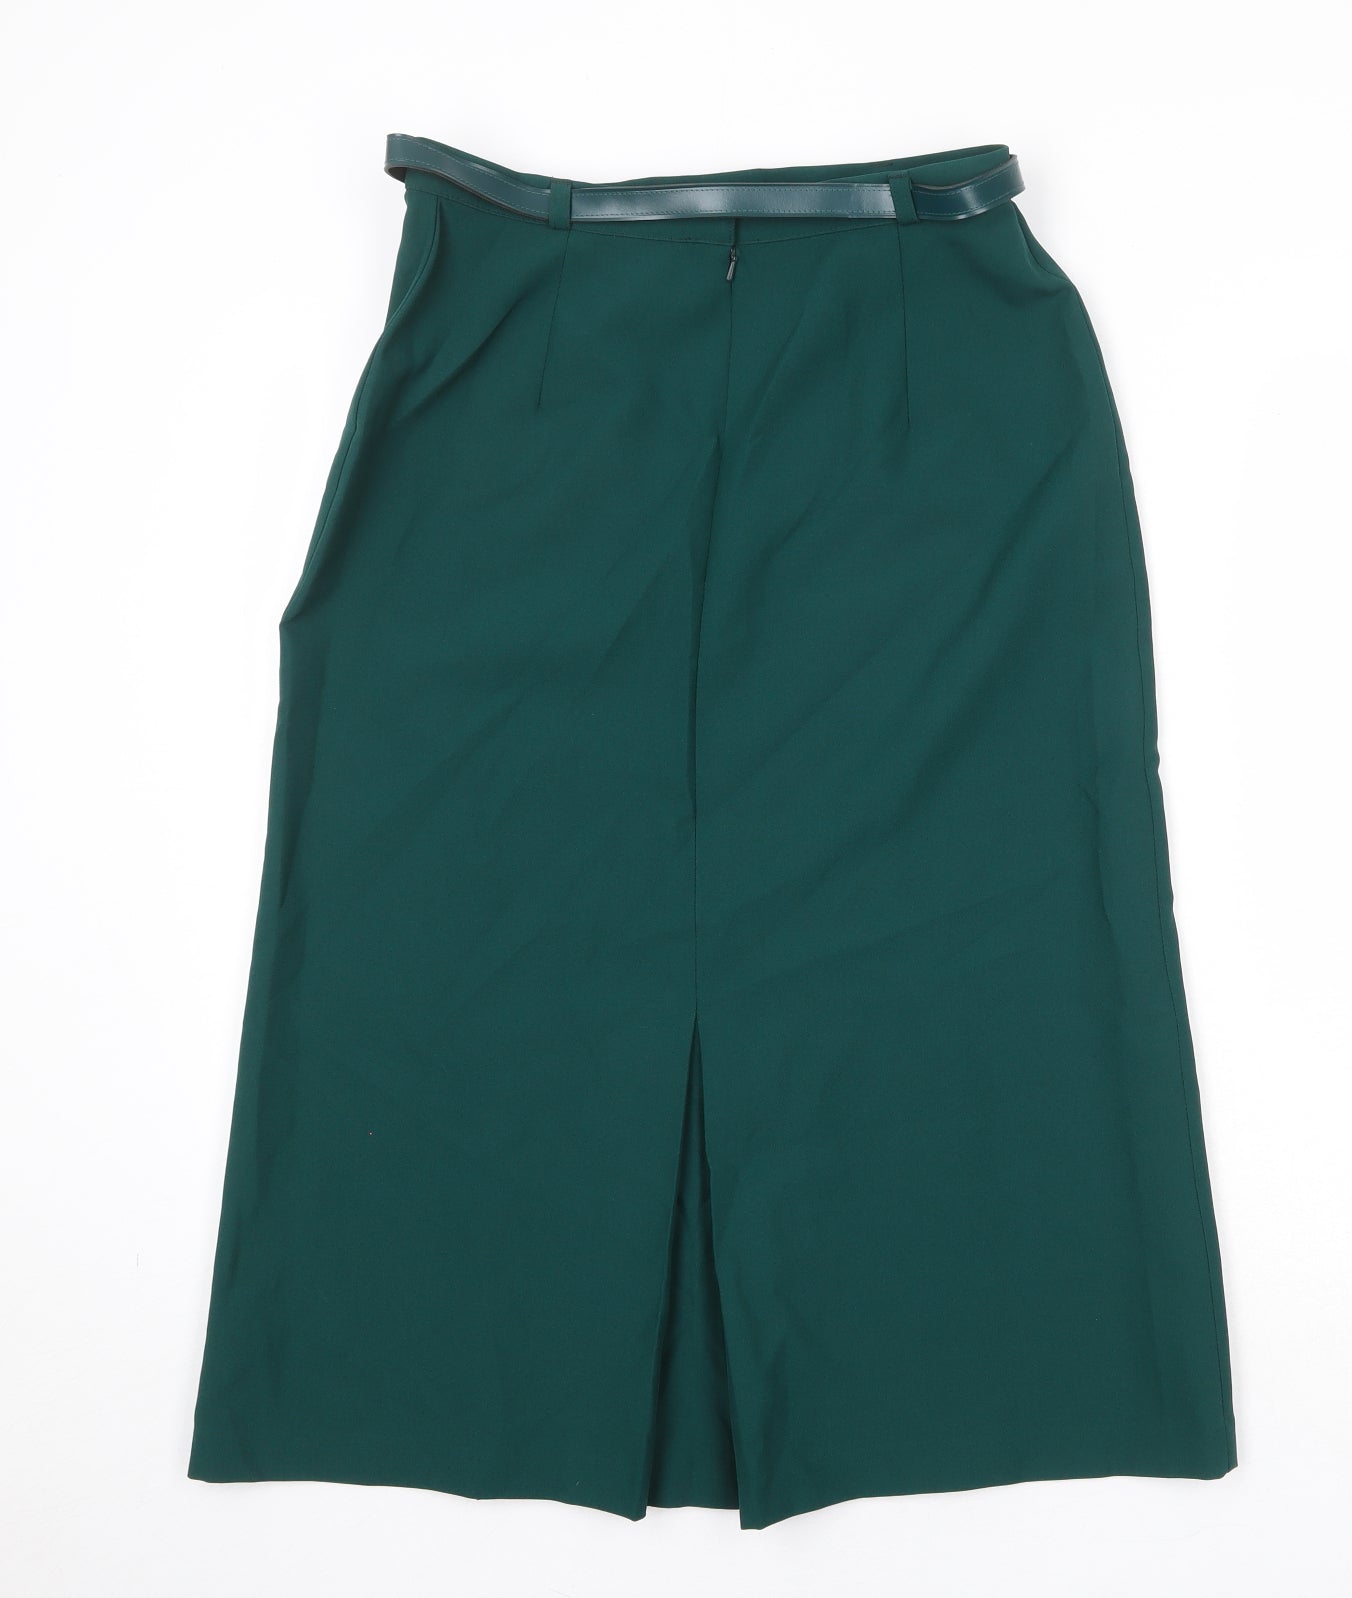 St Michael Womens Green Polyester Pleated Skirt Size 14 Zip - Belt Included